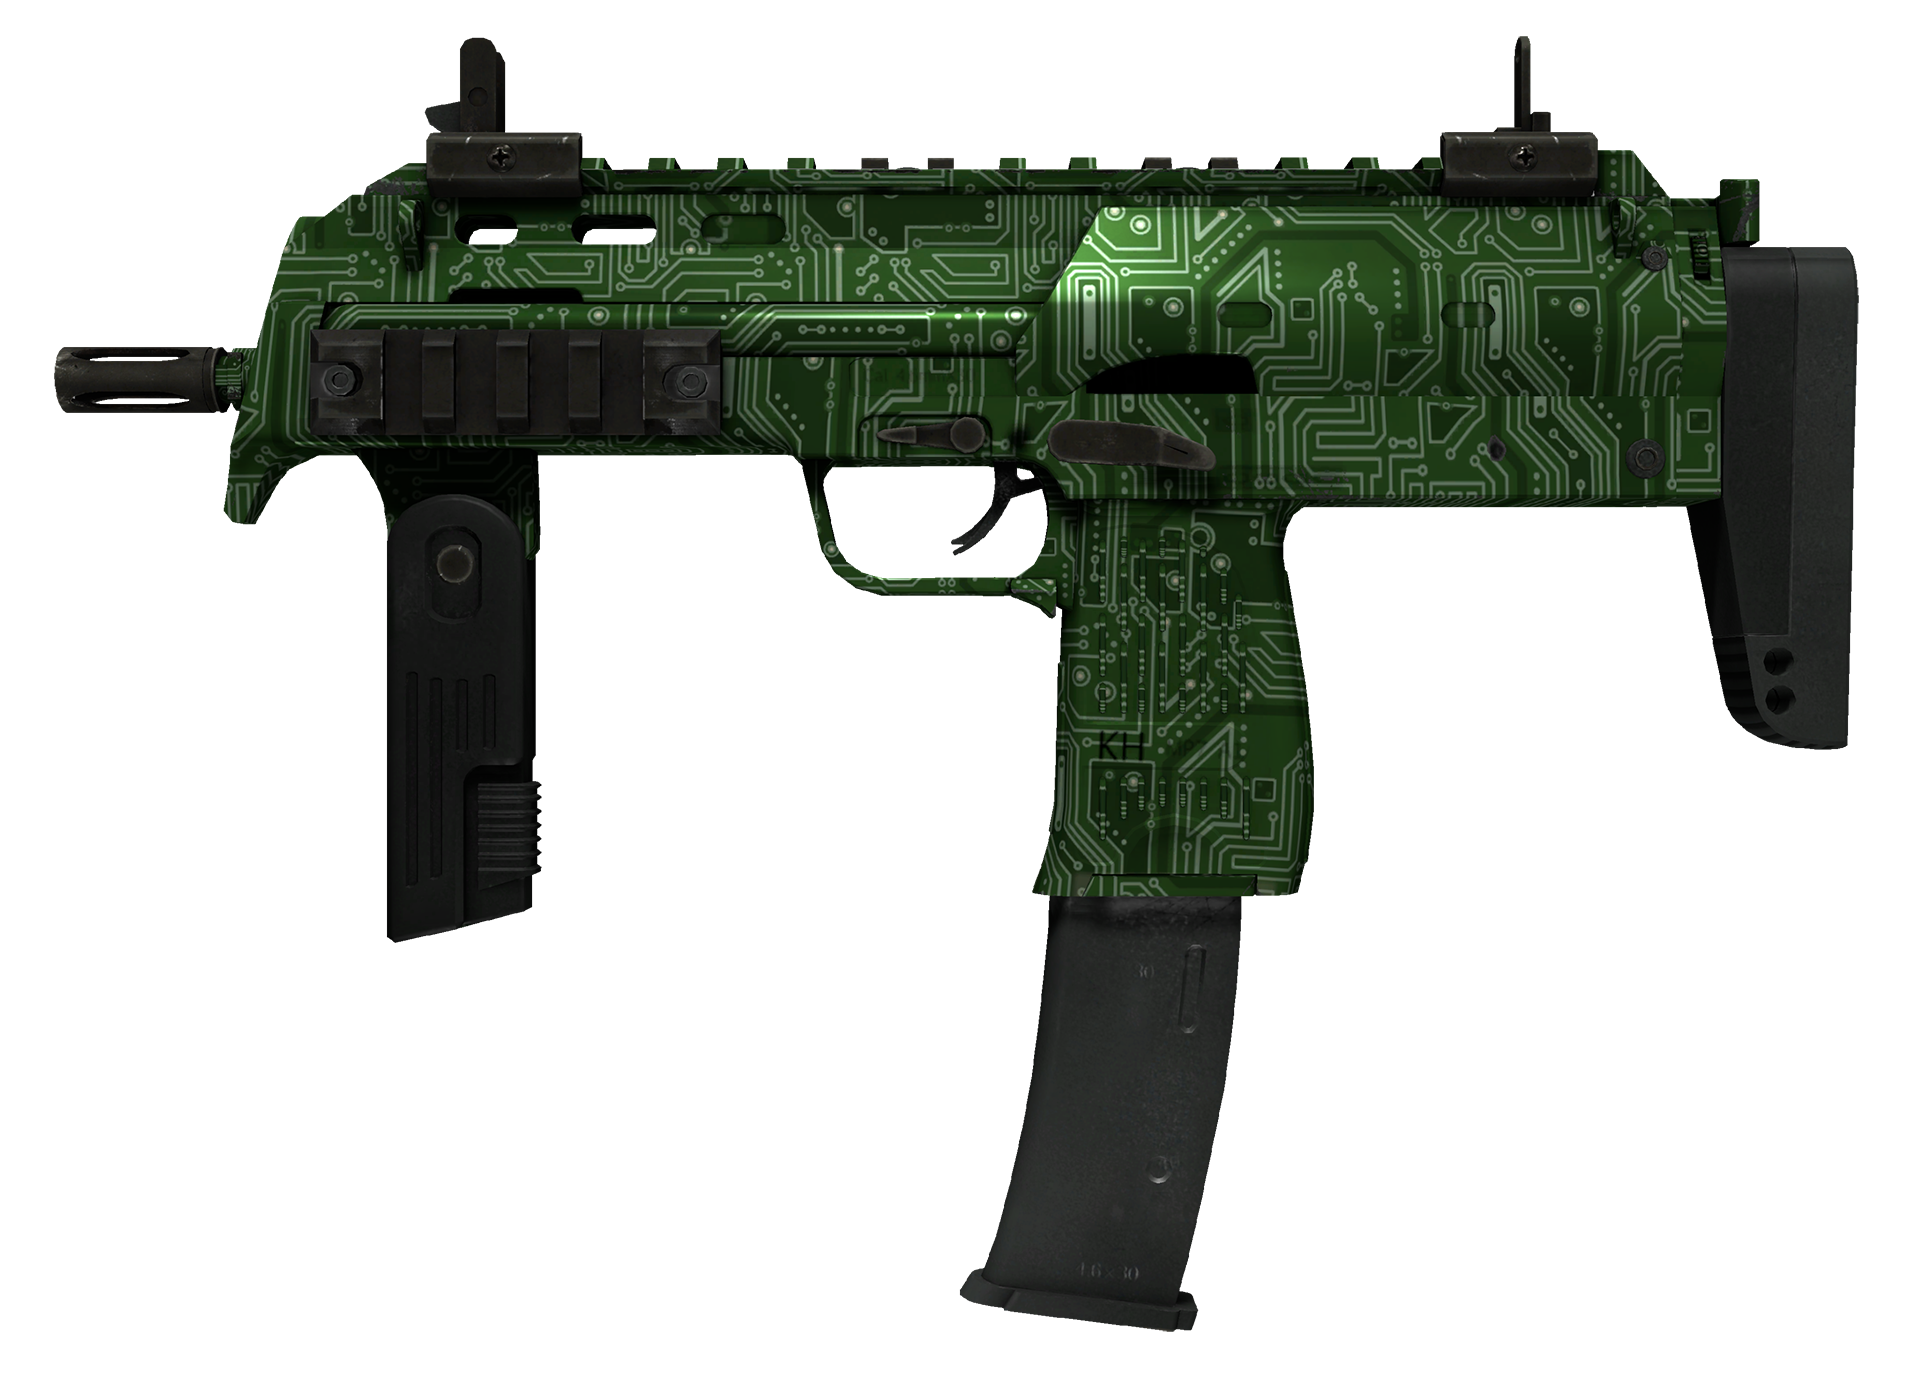 MP7 Motherboard cs go skin download the last version for android